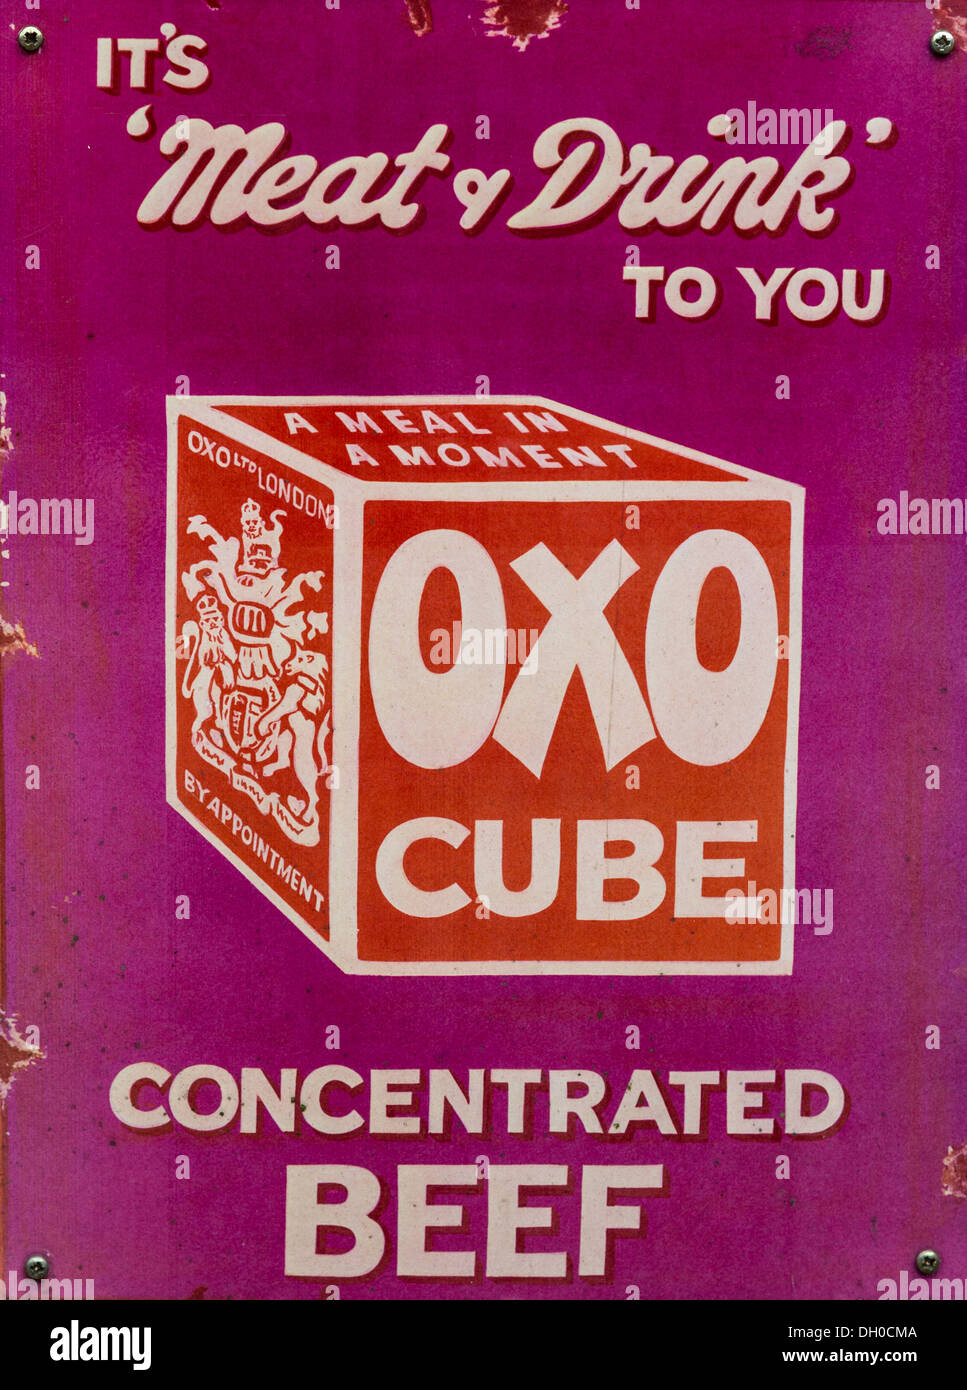 OXO Cube metal advertising sign. Stock Photo